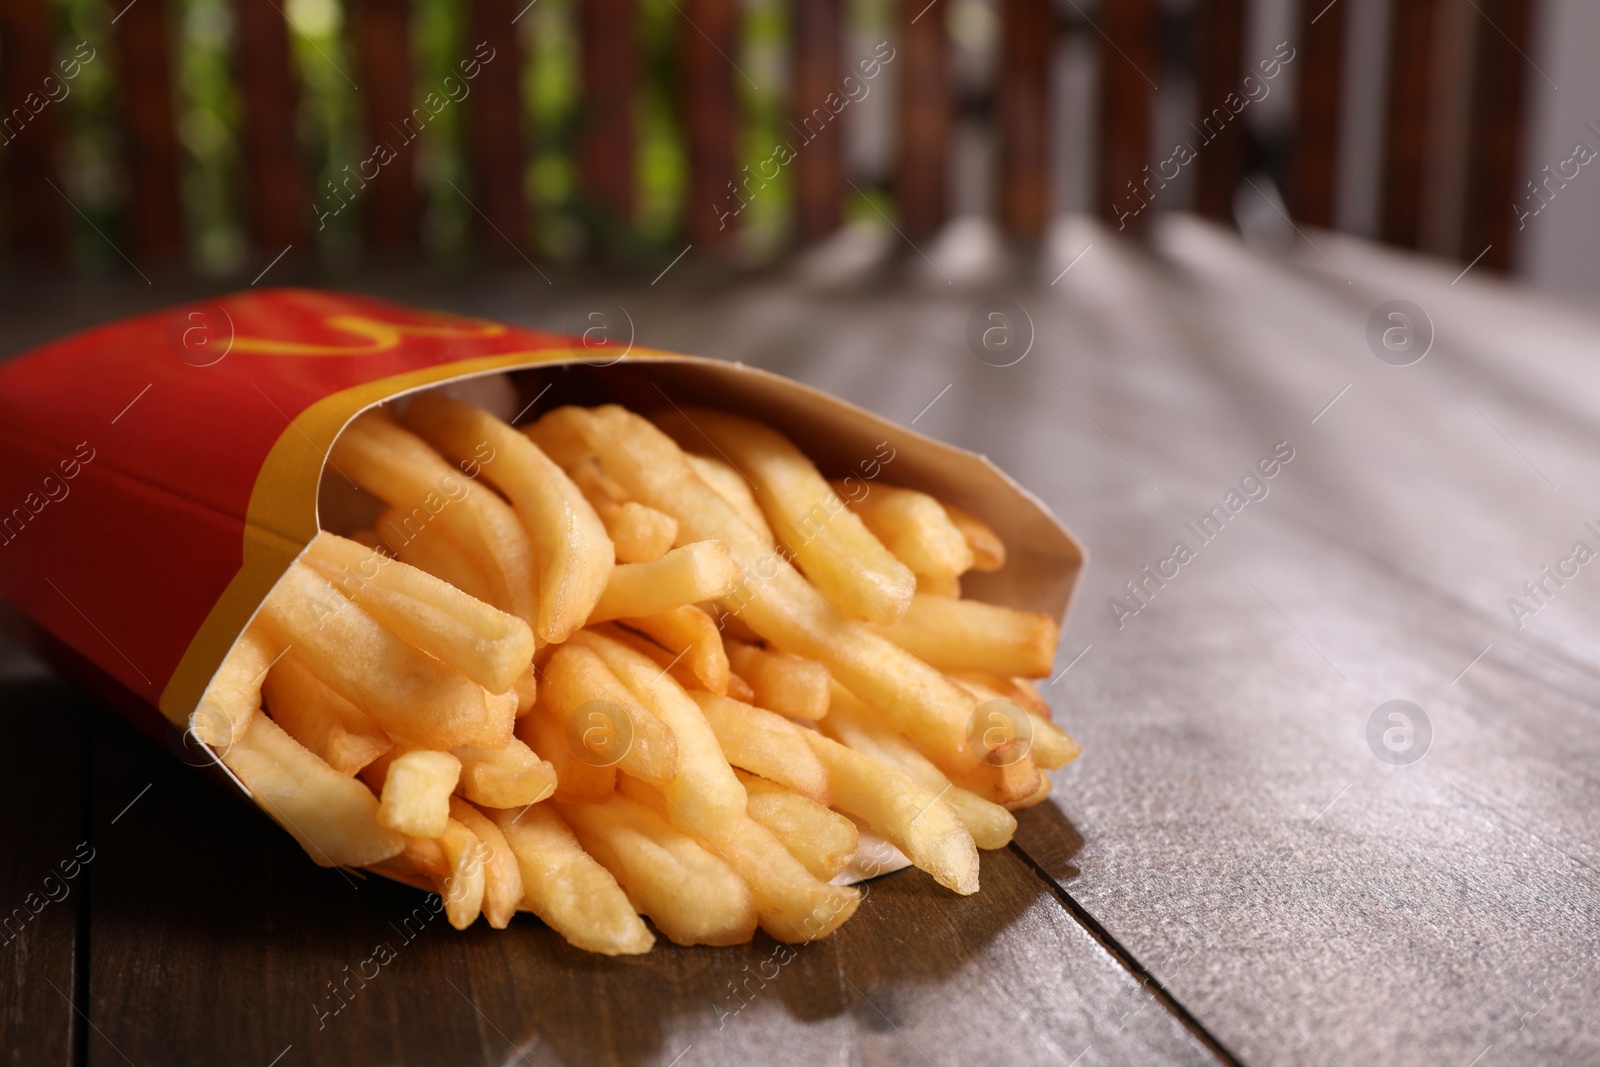 Photo of MYKOLAIV, UKRAINE - AUGUST 12, 2021: Big portion of McDonald's French fries on wooden table, closeup